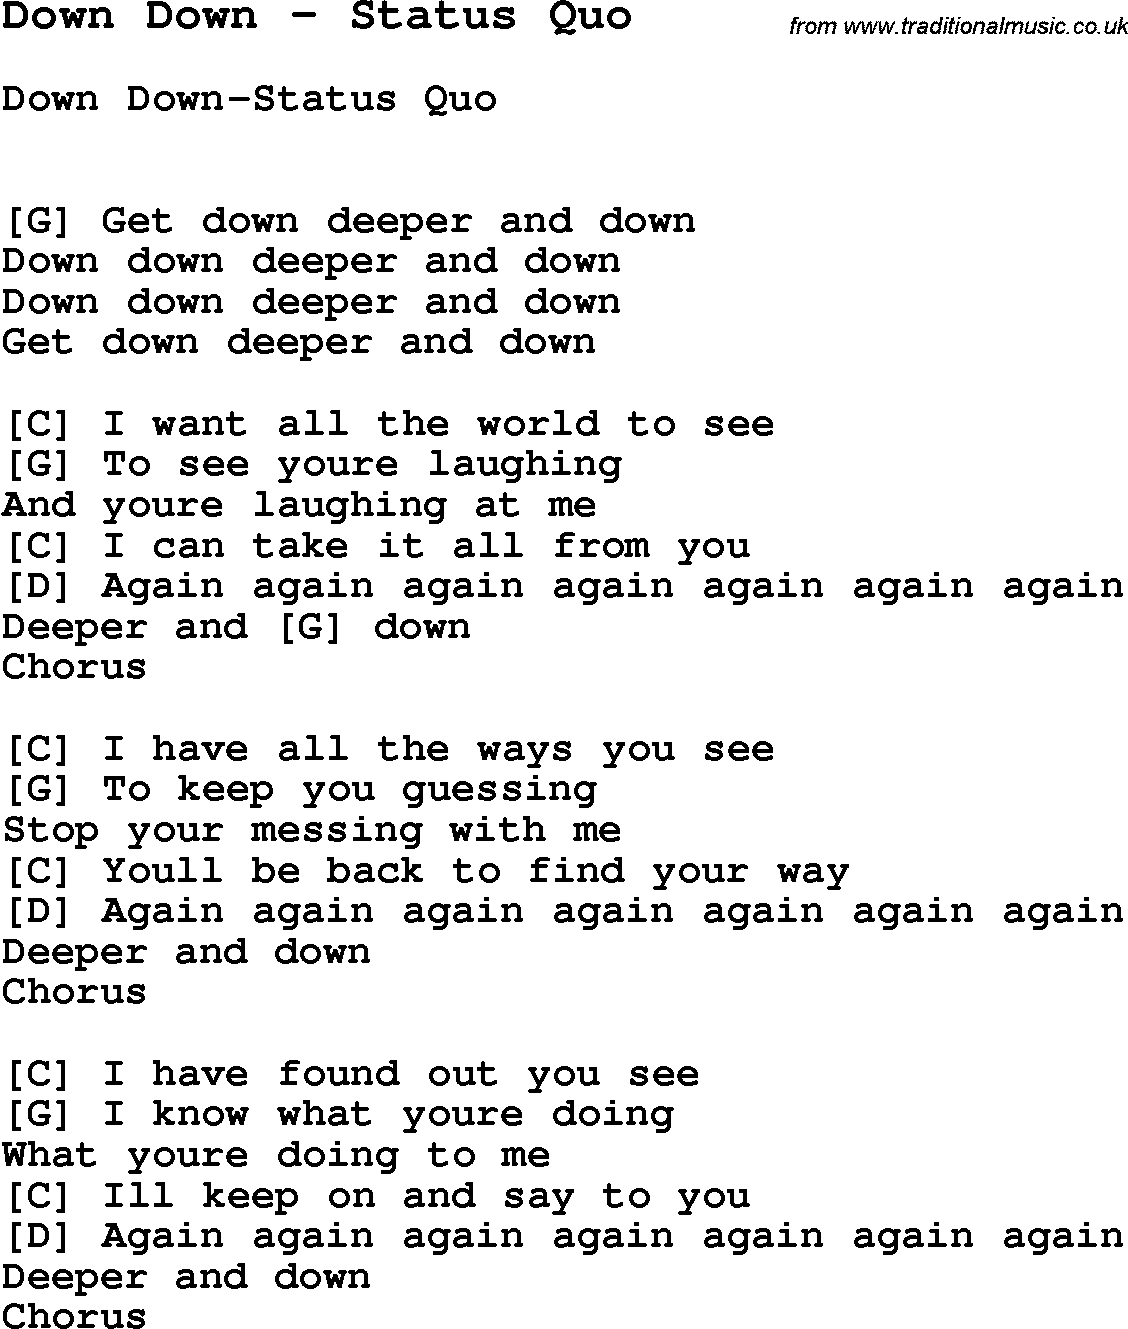 Song Down Down by Status Quo, with lyrics for vocal performance and accompaniment chords for Ukulele, Guitar Banjo etc.